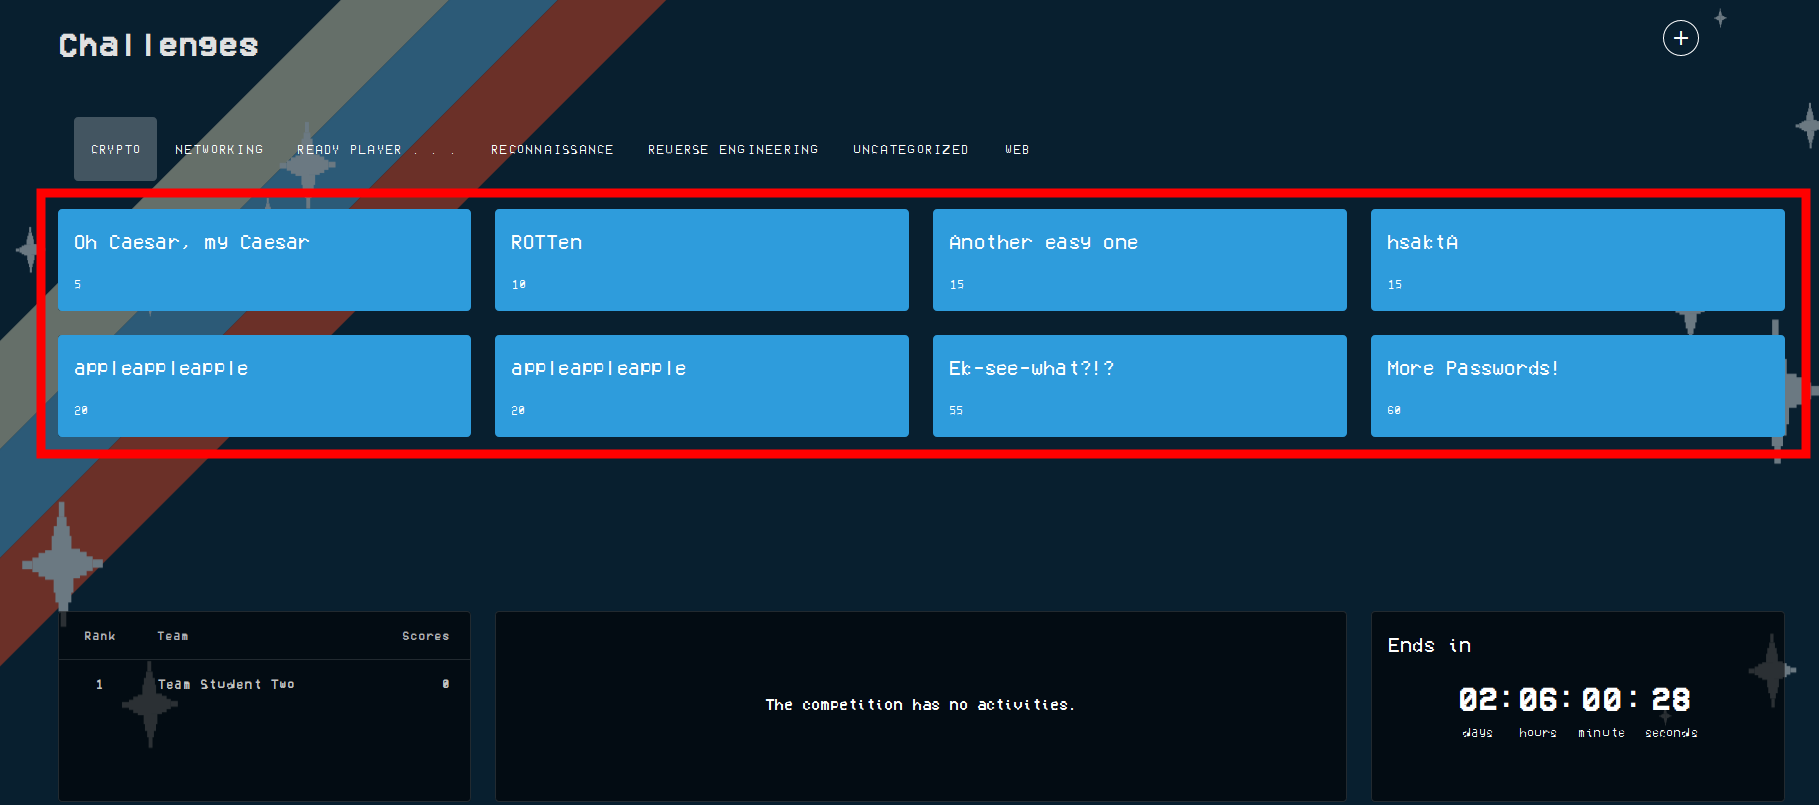 On the Cloud CTF starting page, pre-made challenges are shown in light blue boxes, just below the CTF categories.